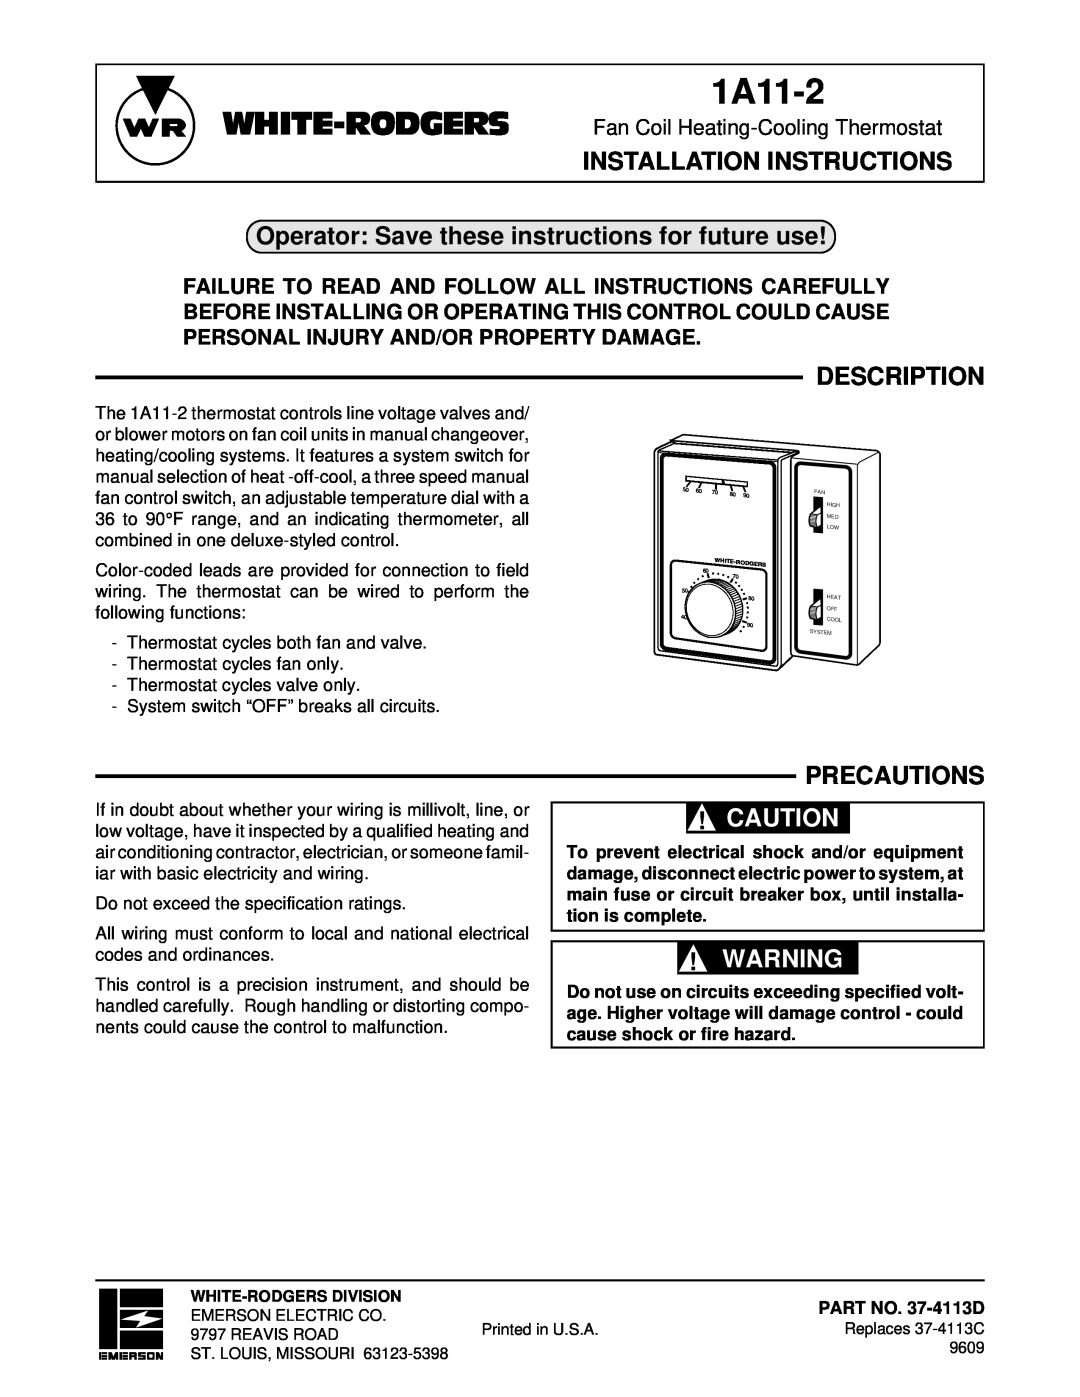 White Rodgers 1A11-2 installation instructions Operator Save these instructions for future use, Description, Precautions 